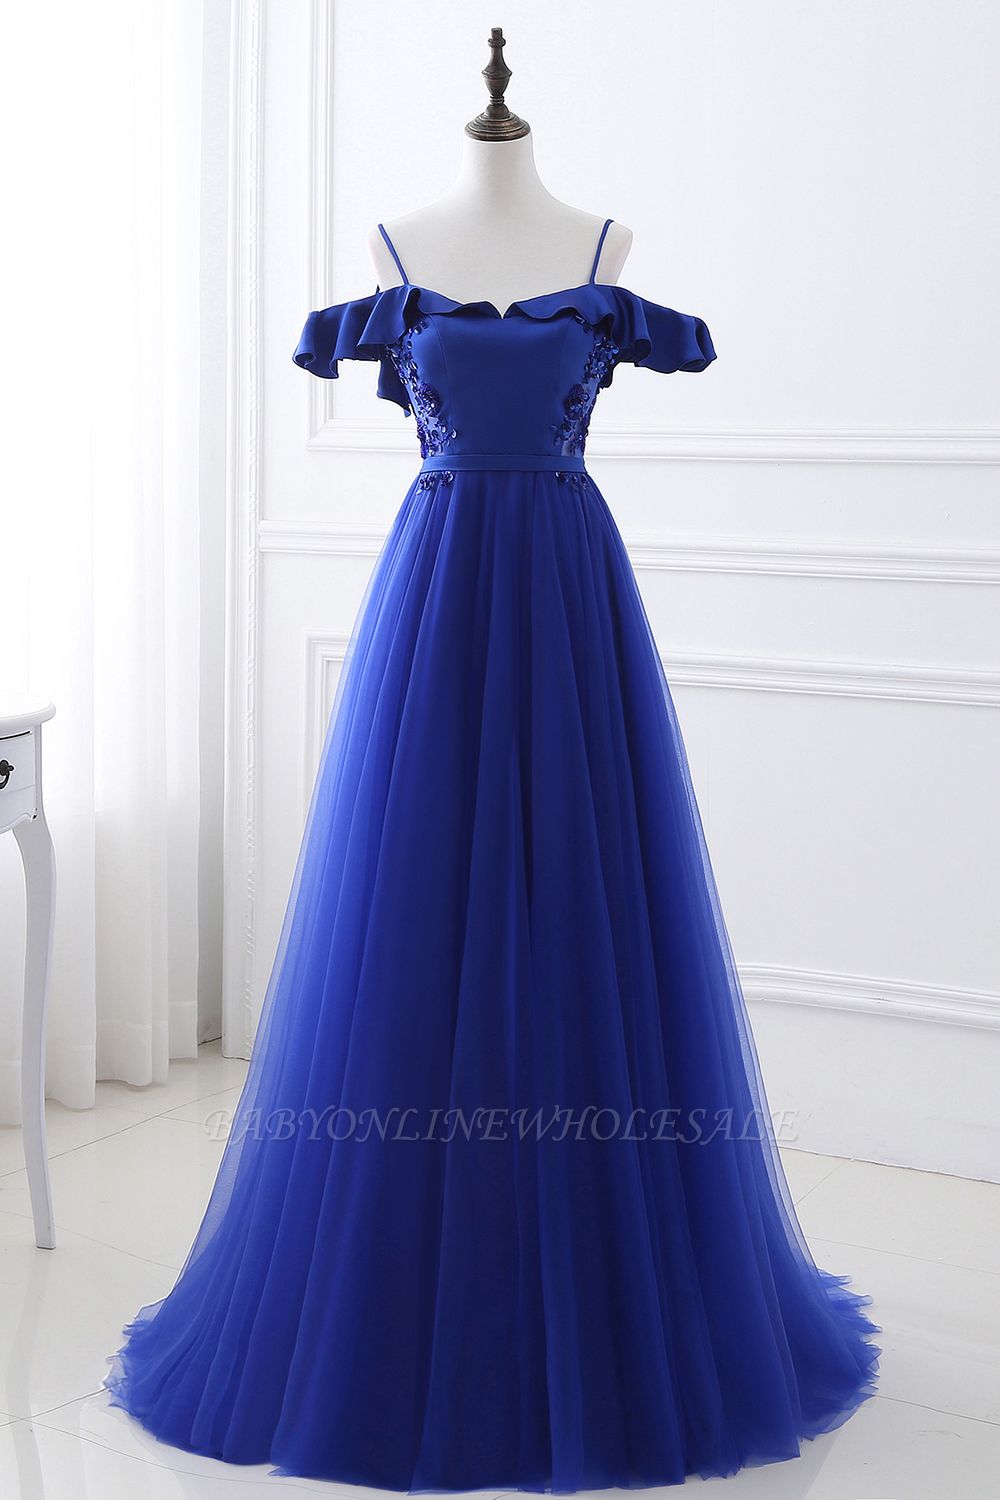 Stunning Off the shoulder blue Tulle ball gown prom dresses